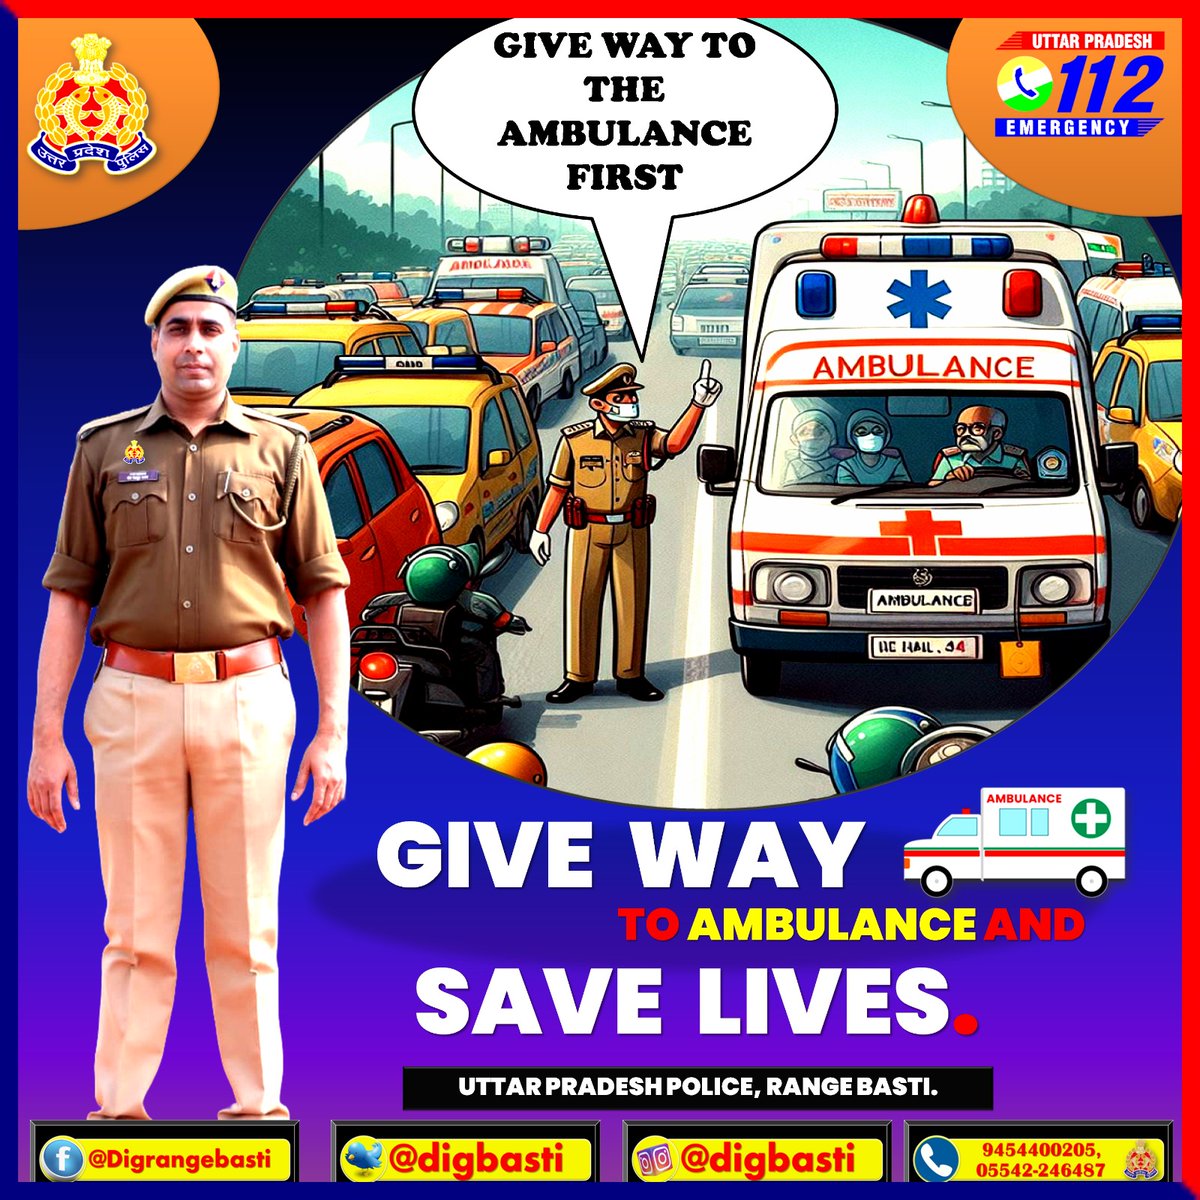 Save Lives. So that it can quickly get to the scene to treat the sick or injured. #UPPolice #uttarpradeshtrafficpolice #trafficrules